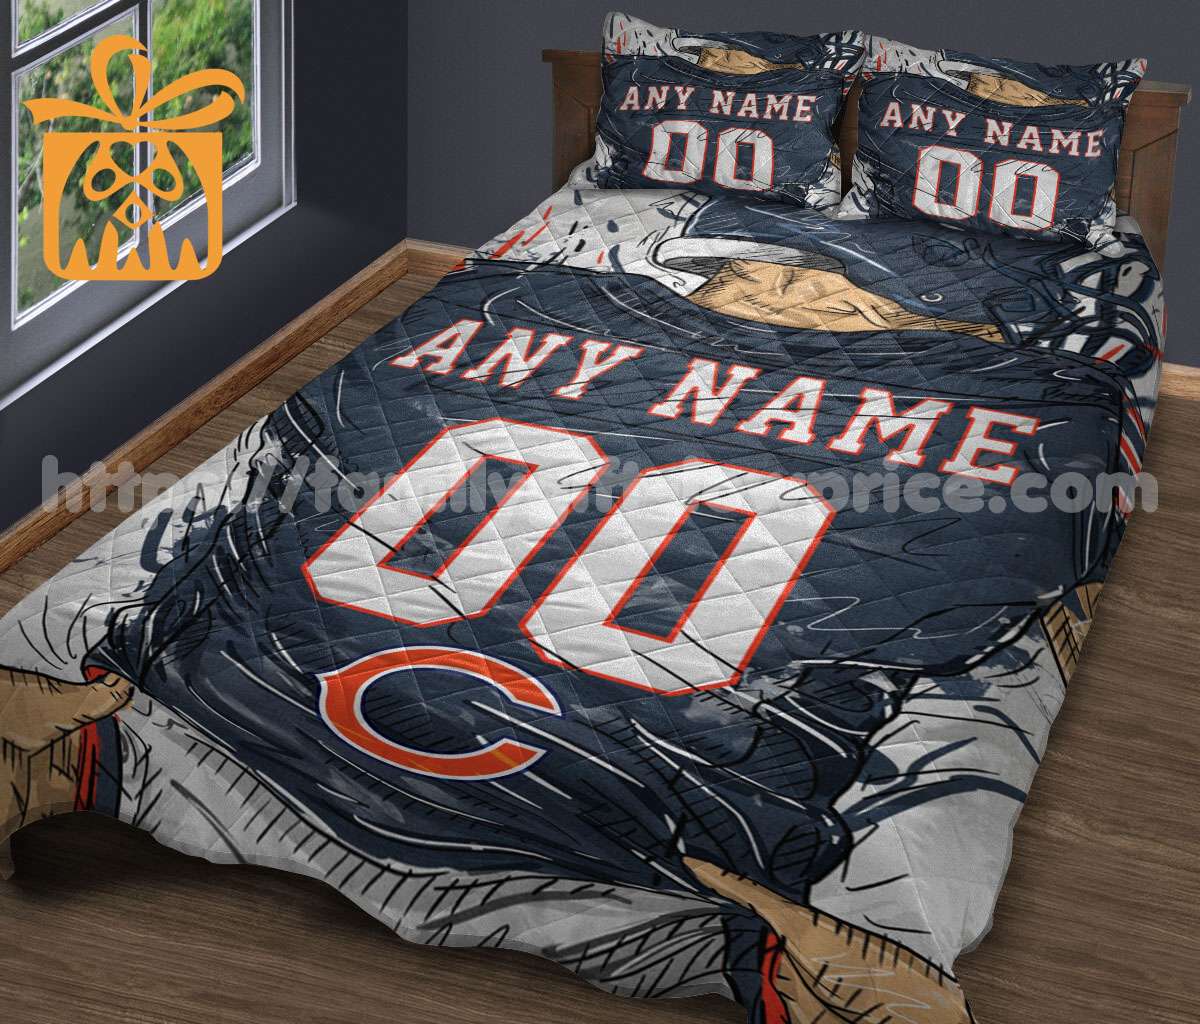 Chicago Bears Jerseys Quilt Bedding Sets, Chicago Bears Gifts, Personalized NFL Jerseys with Your Name & Number